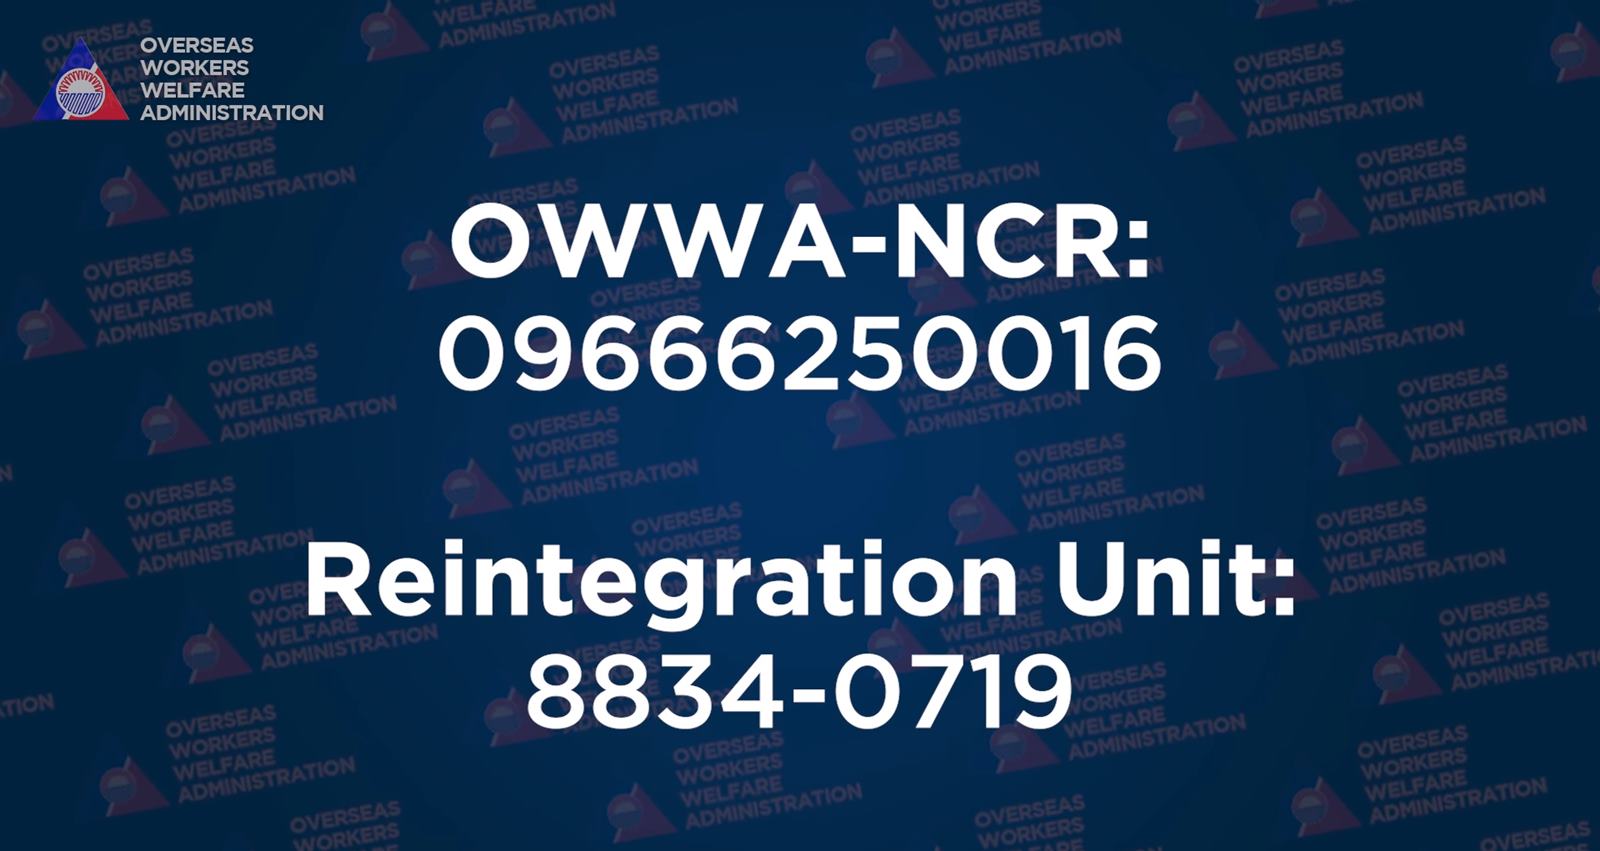 owwa ncr important numbers